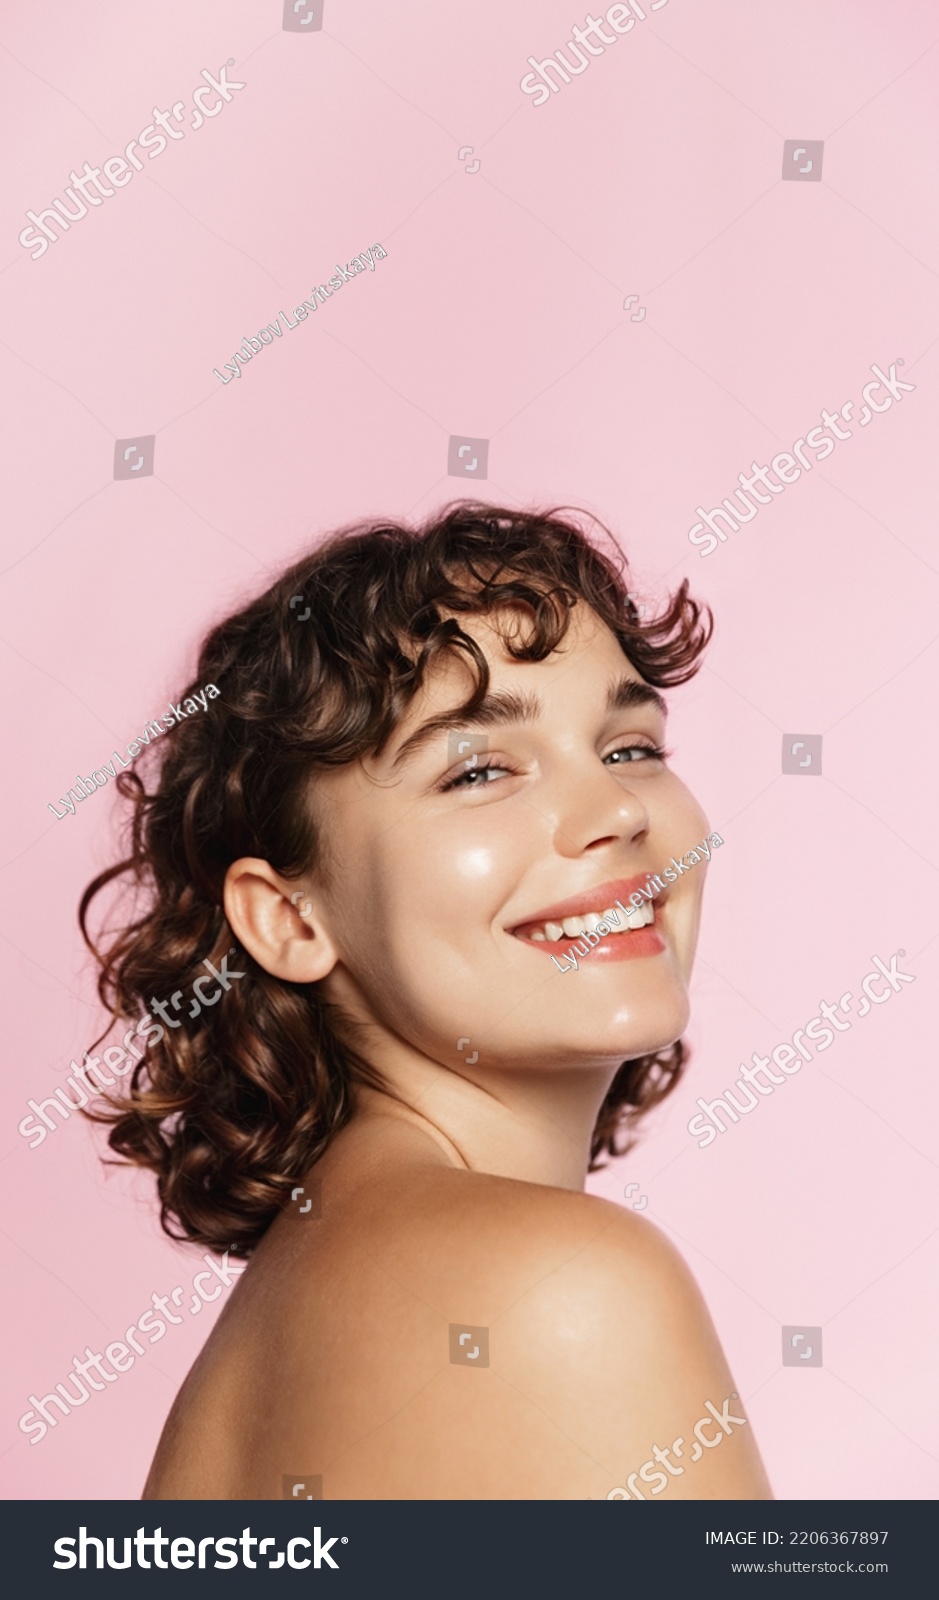 Skin care. Woman with beauty face and healthy facial skin portrait. Beautiful curly girl model with natural makeup touching glowing hydrated skin on pink background closeup. High quality image. #2206367897